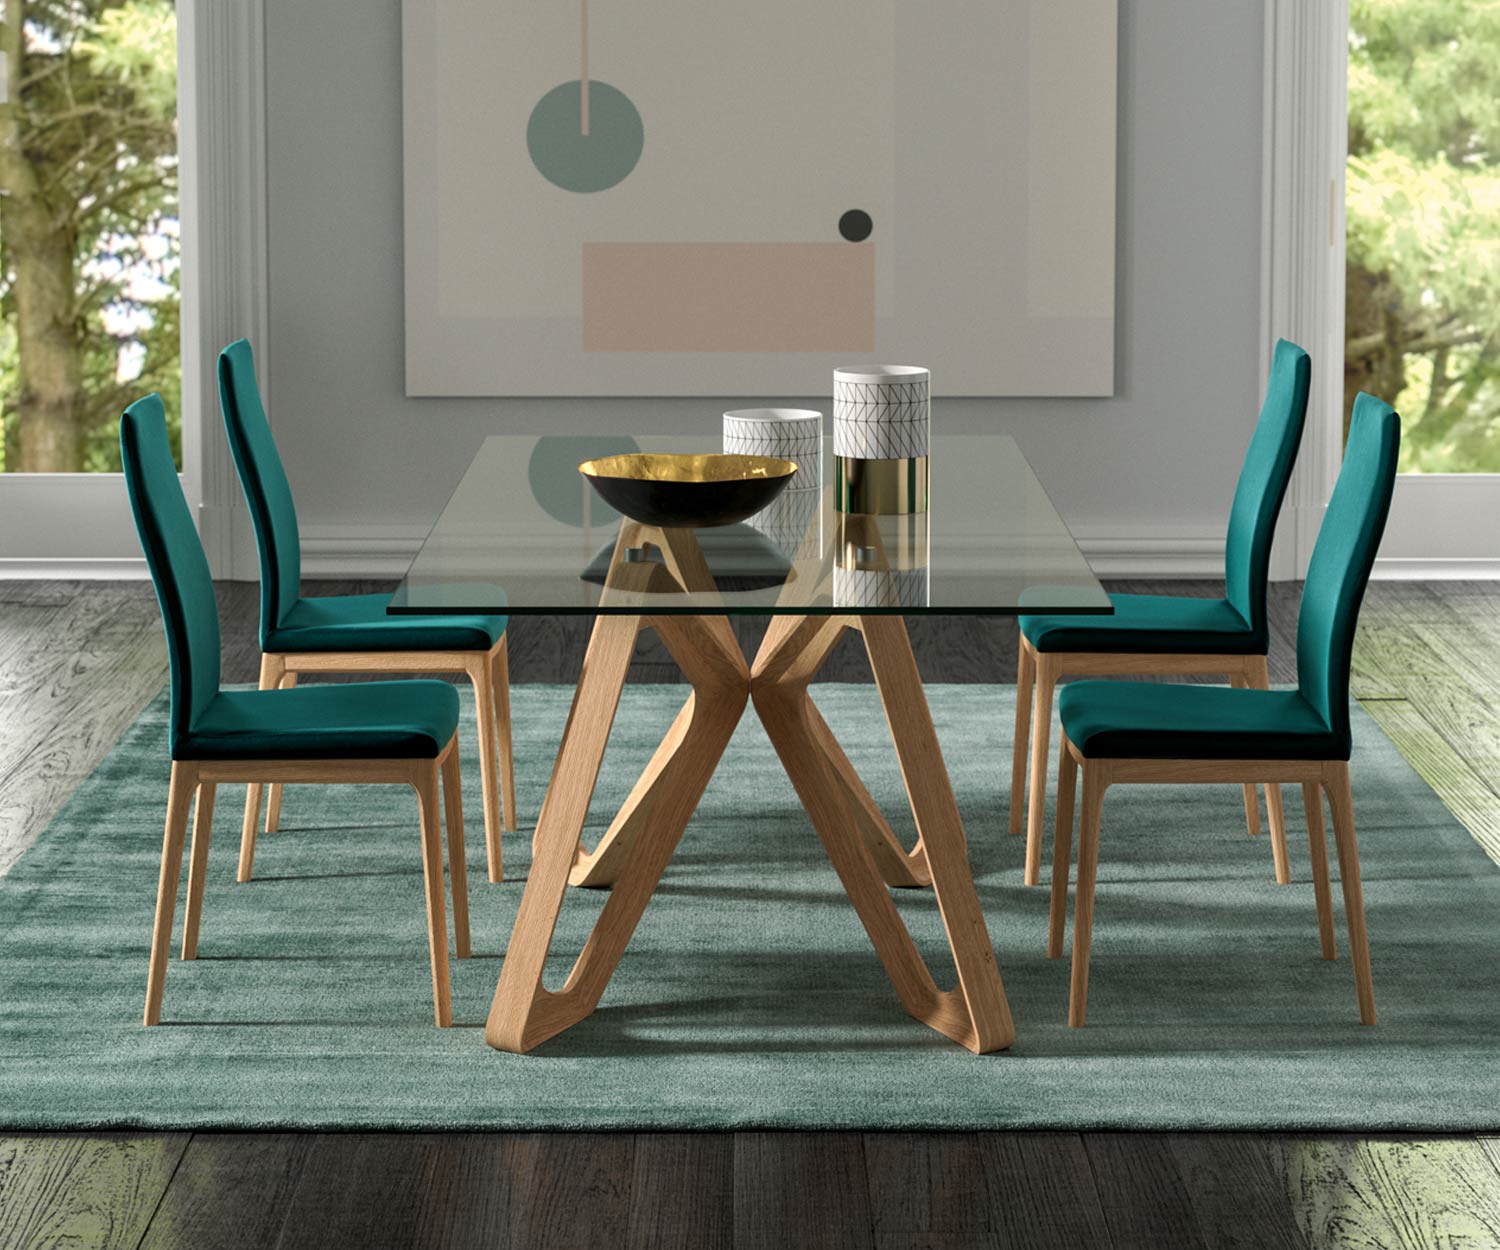 Exclusive Ozzio Papillon Design glass table T253 Legs solid wood in light-coloured natural oak